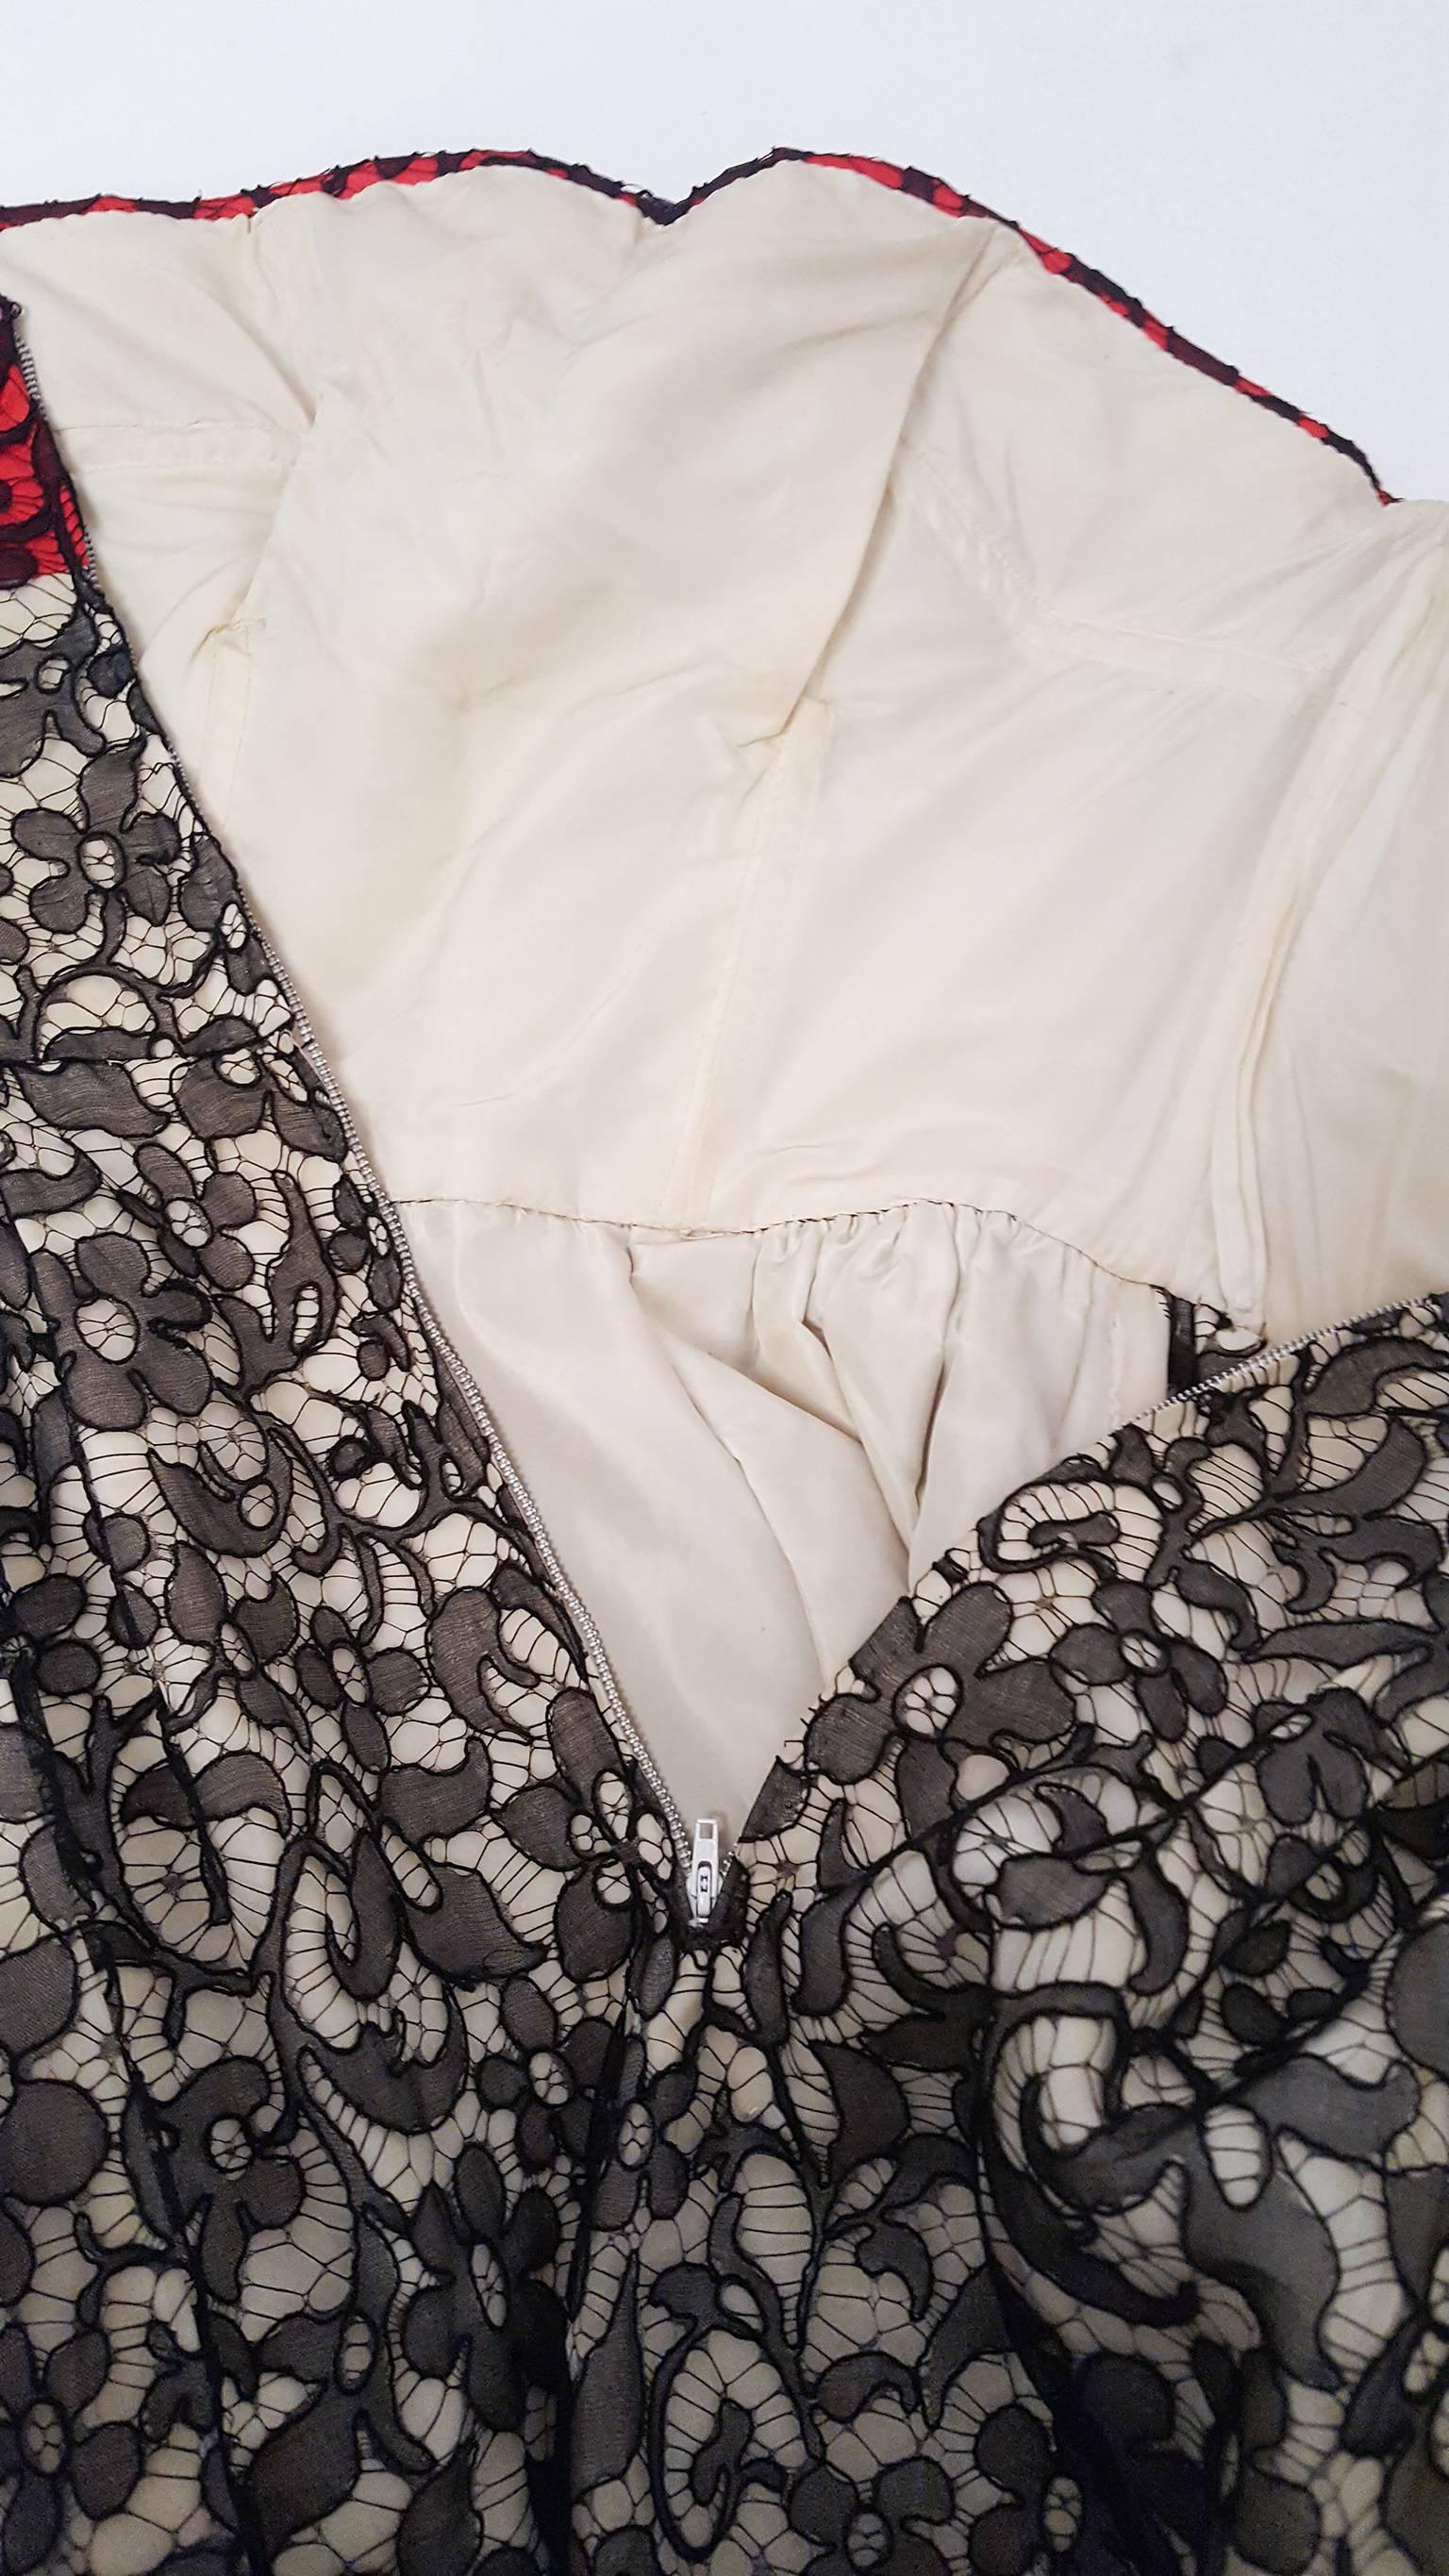 50s Red and White Strapless Gown w/ Black Lace In Excellent Condition For Sale In San Francisco, CA